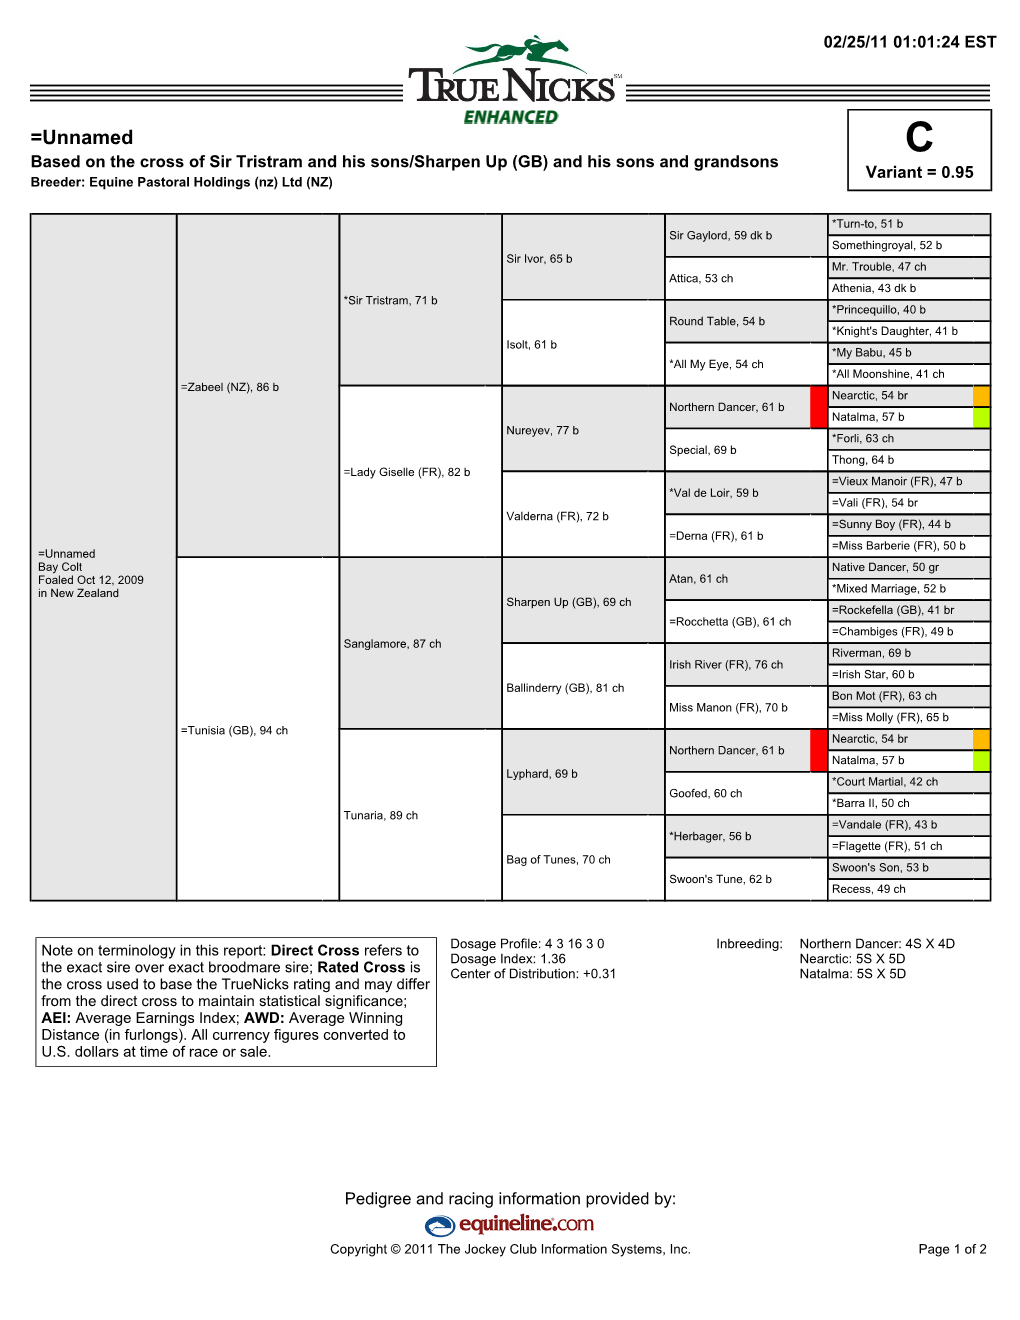 =Unnamed C Based on the Cross of Sir Tristram and His Sons/Sharpen up (GB) and His Sons and Grandsons Variant = 0.95 Breeder: Equine Pastoral Holdings (Nz) Ltd (NZ)